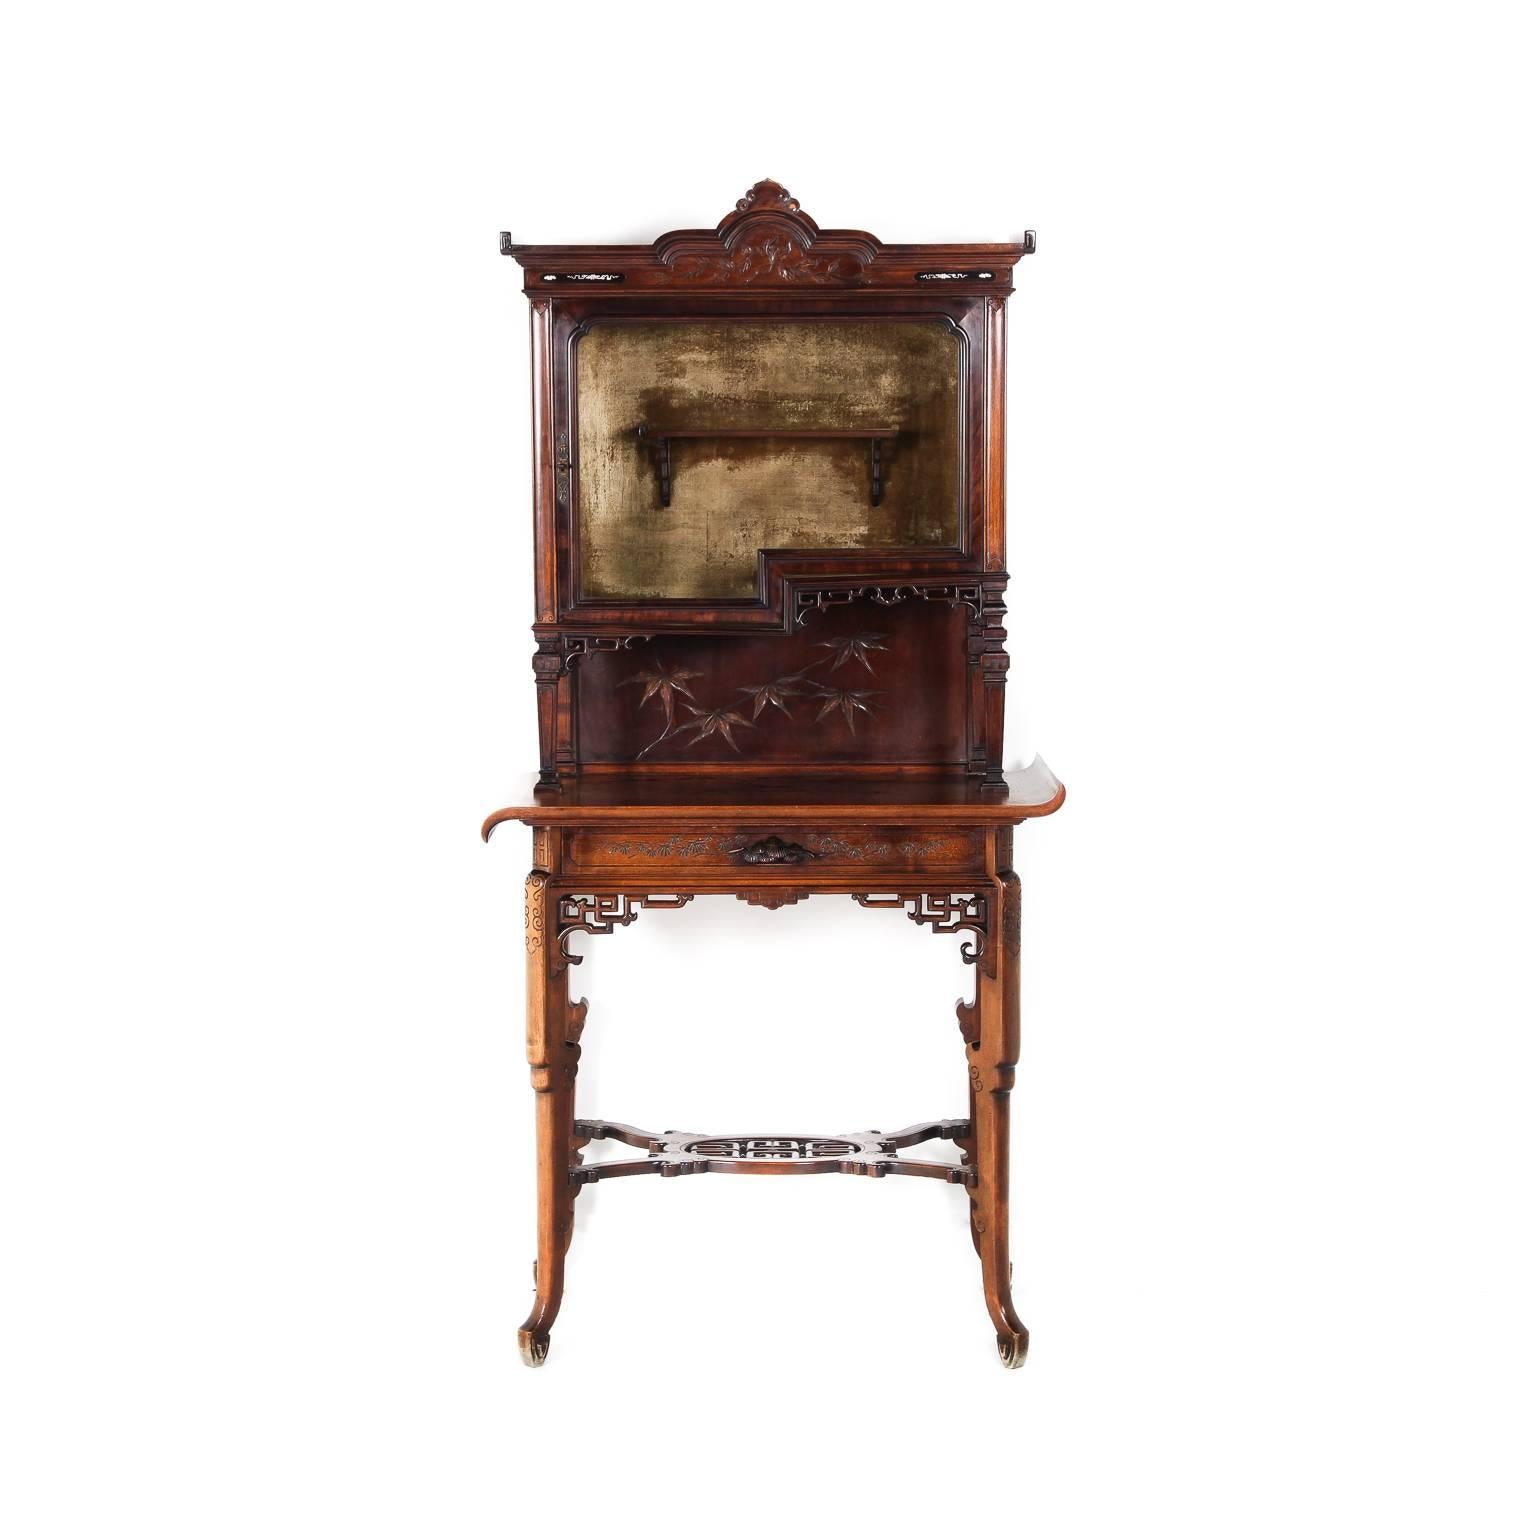 A very unusual Chinoiserie vitrine, or display cabinet, in the manner of Gabriel Viardot. The display top is carved and inlaid with mother-of-pearl and raised on elaborately pierce-carved legs. French, circa 1890.

Gabriel Viardot (1830-1906) was a